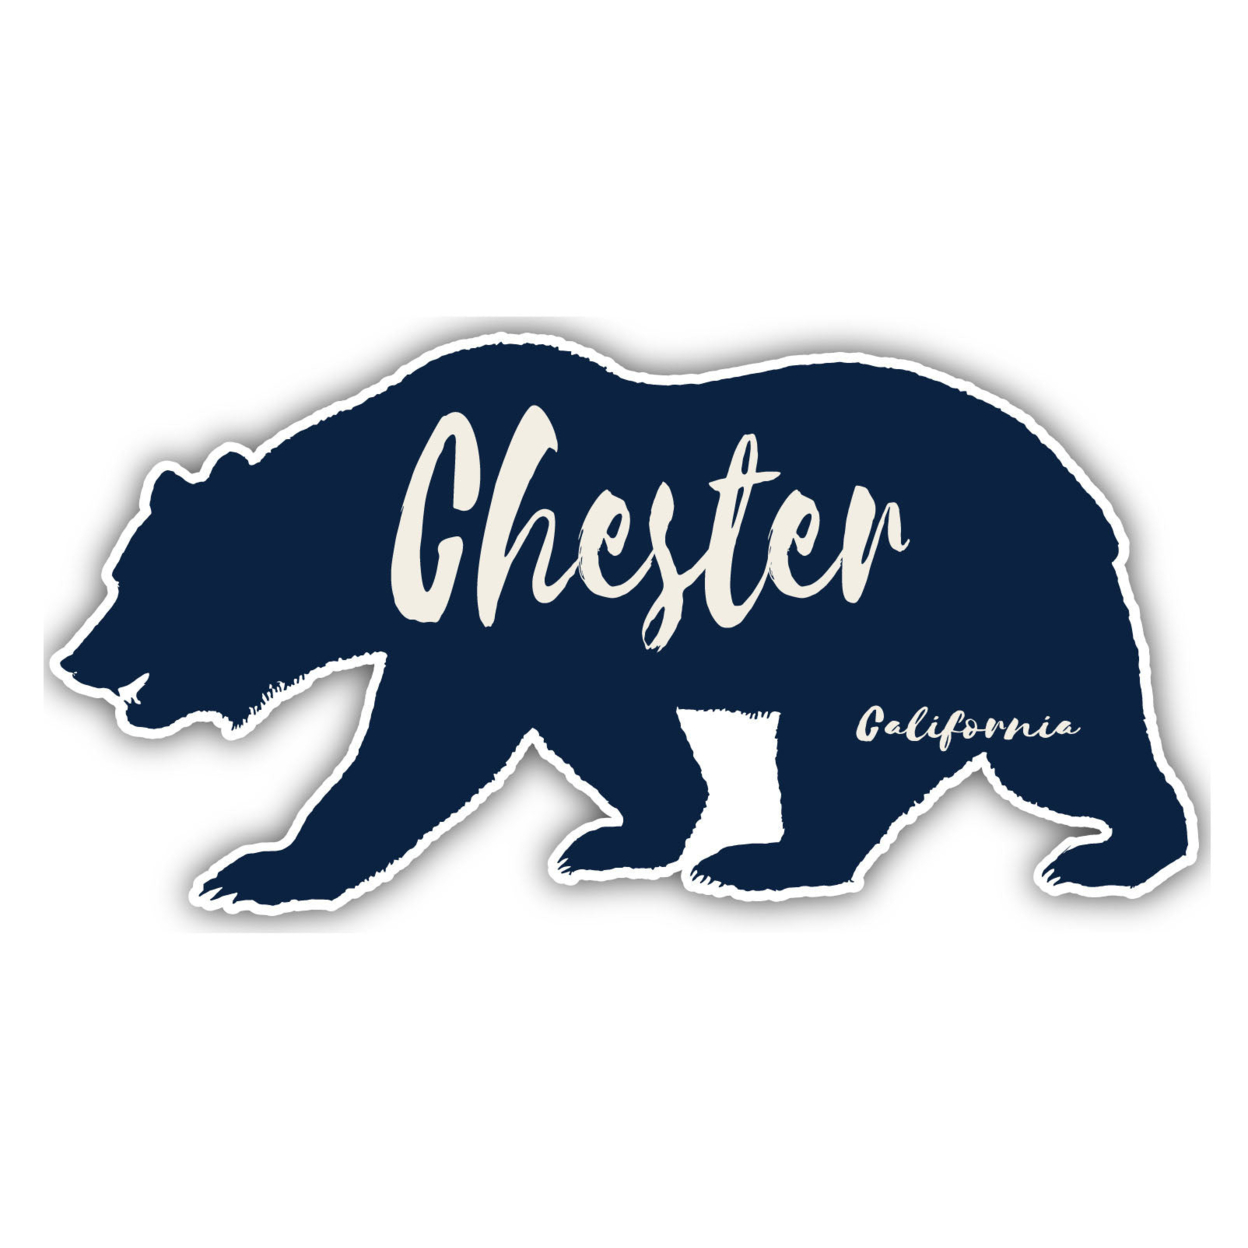 Chester California Souvenir Decorative Stickers (Choose Theme And Size) - 4-Pack, 4-Inch, Bear